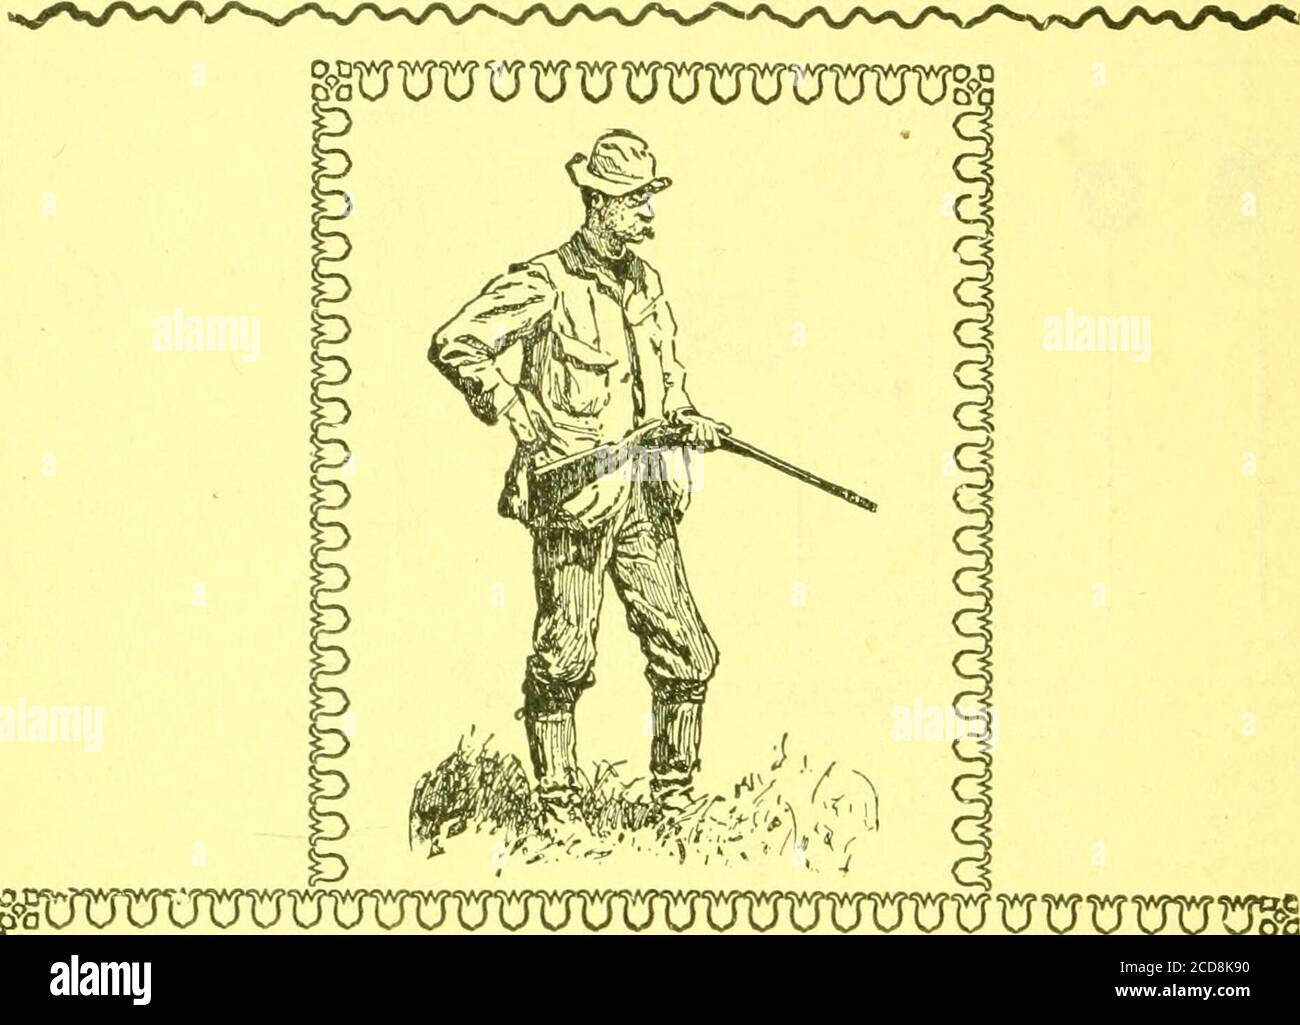 . Spalding's official golf guide.. . No. 25. Each, SI.CO NEW YORK. Complete Catalogue of AthleUc Sports Mailed Free A. G. SPALDING & BROS., CHICAGO. DENVER. SPALDING*S ATHLETIC LIBRARY.. UUUXTUmi Geo- Barnard & Co. Manufactttrers of Hunting Clothingand Equipments J99-20J MADISON STREETCHICAGO SEND FOR CATALOGUE Stock Photo